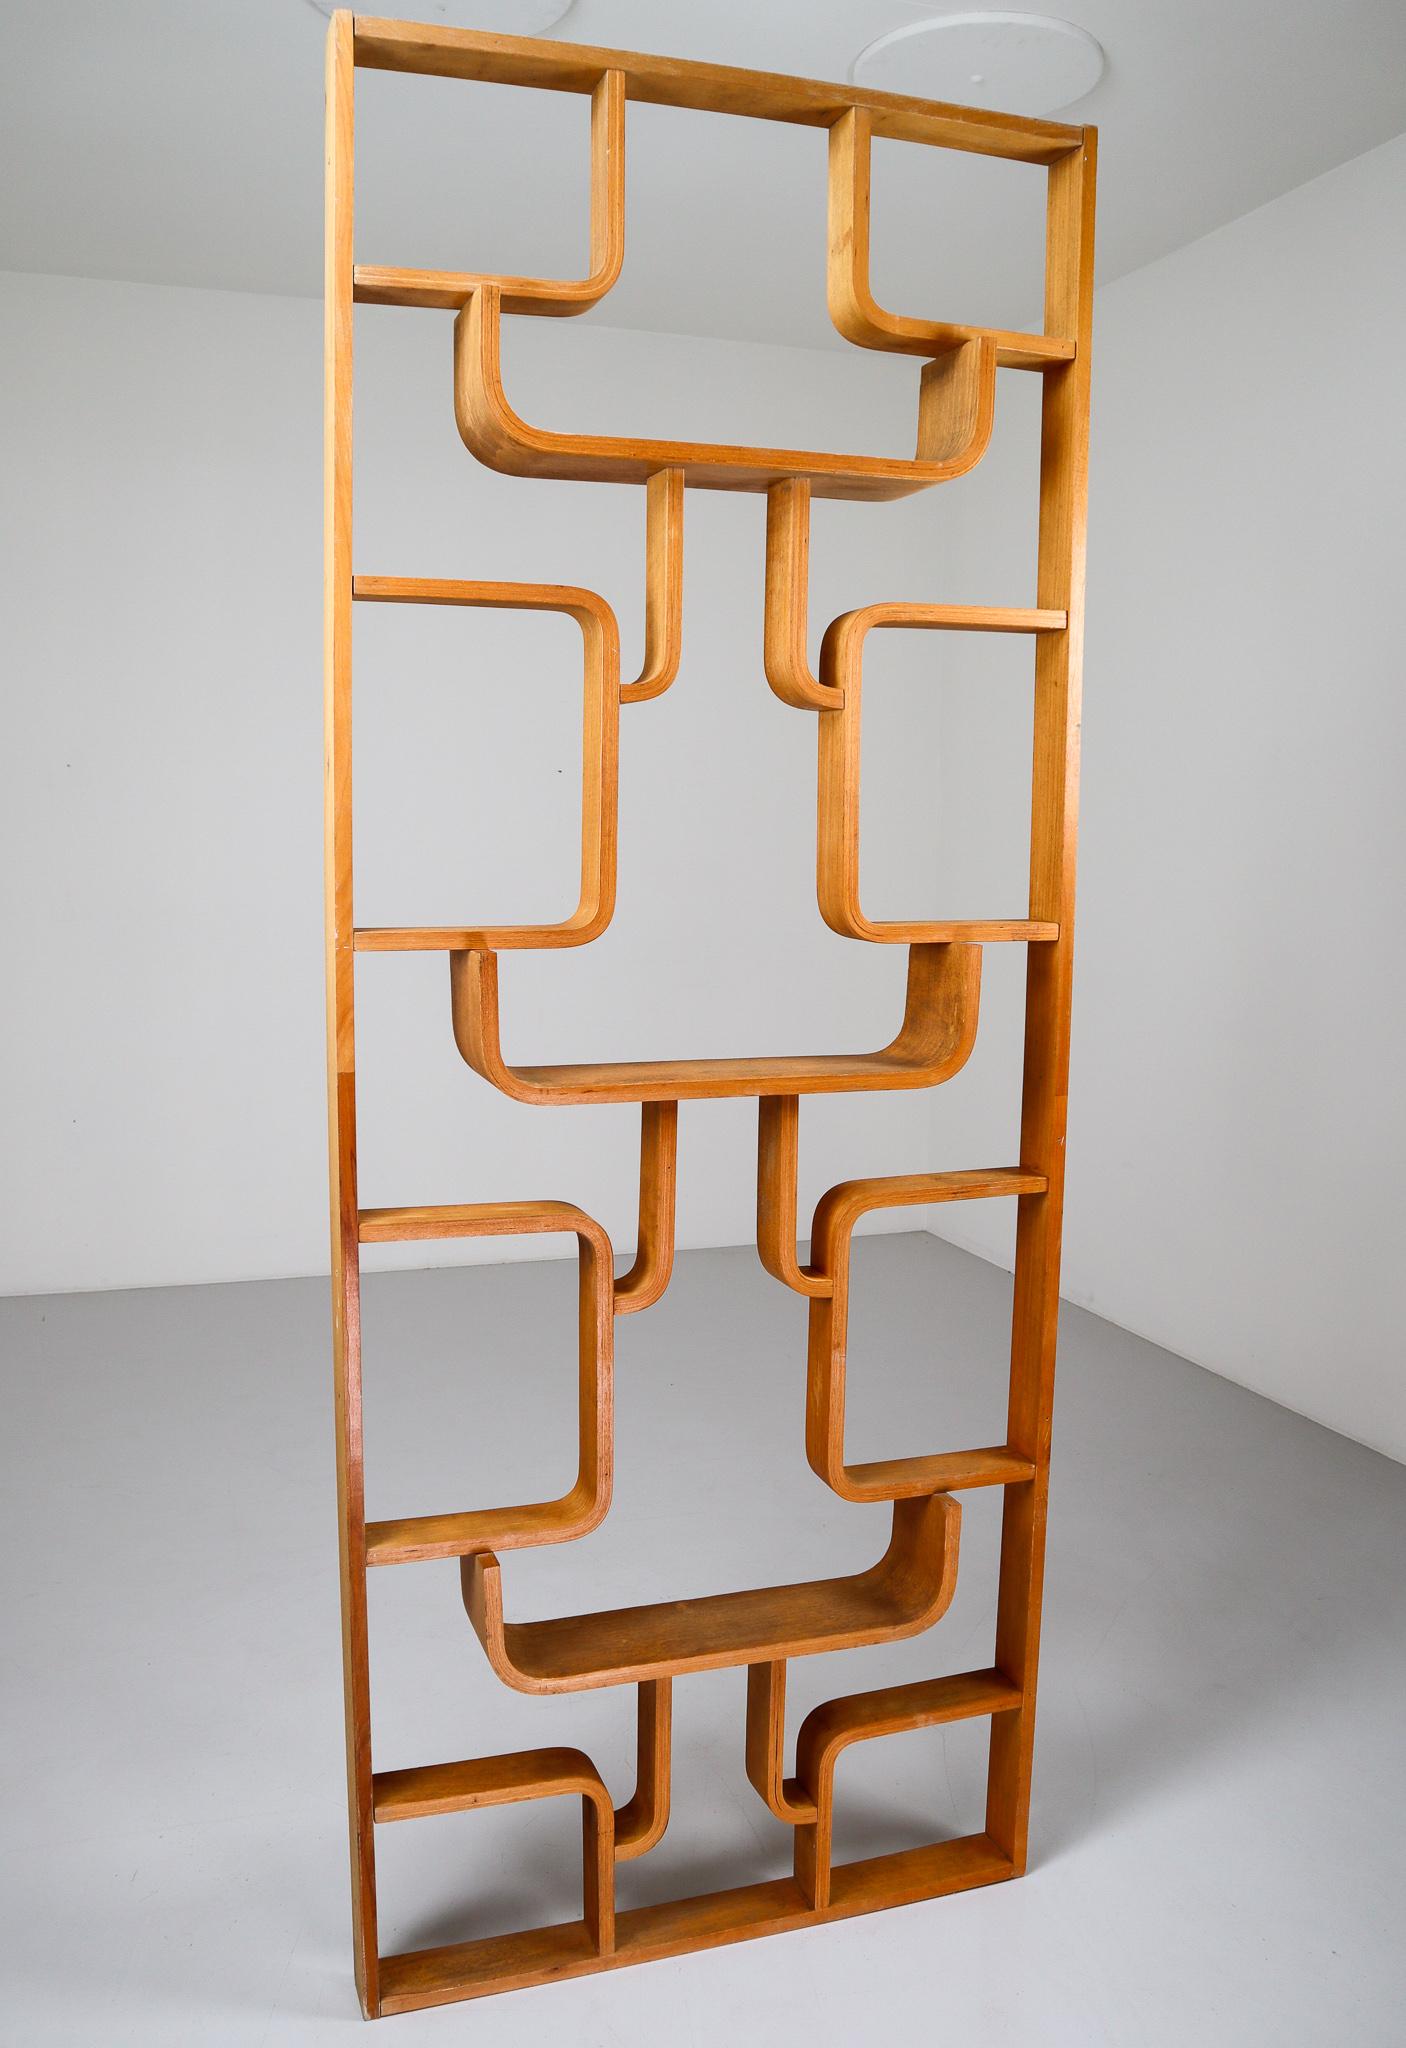 Midcentury Room Divider in Blond Bentwood by Ludvik Volak Czech Republic, 1960s 3